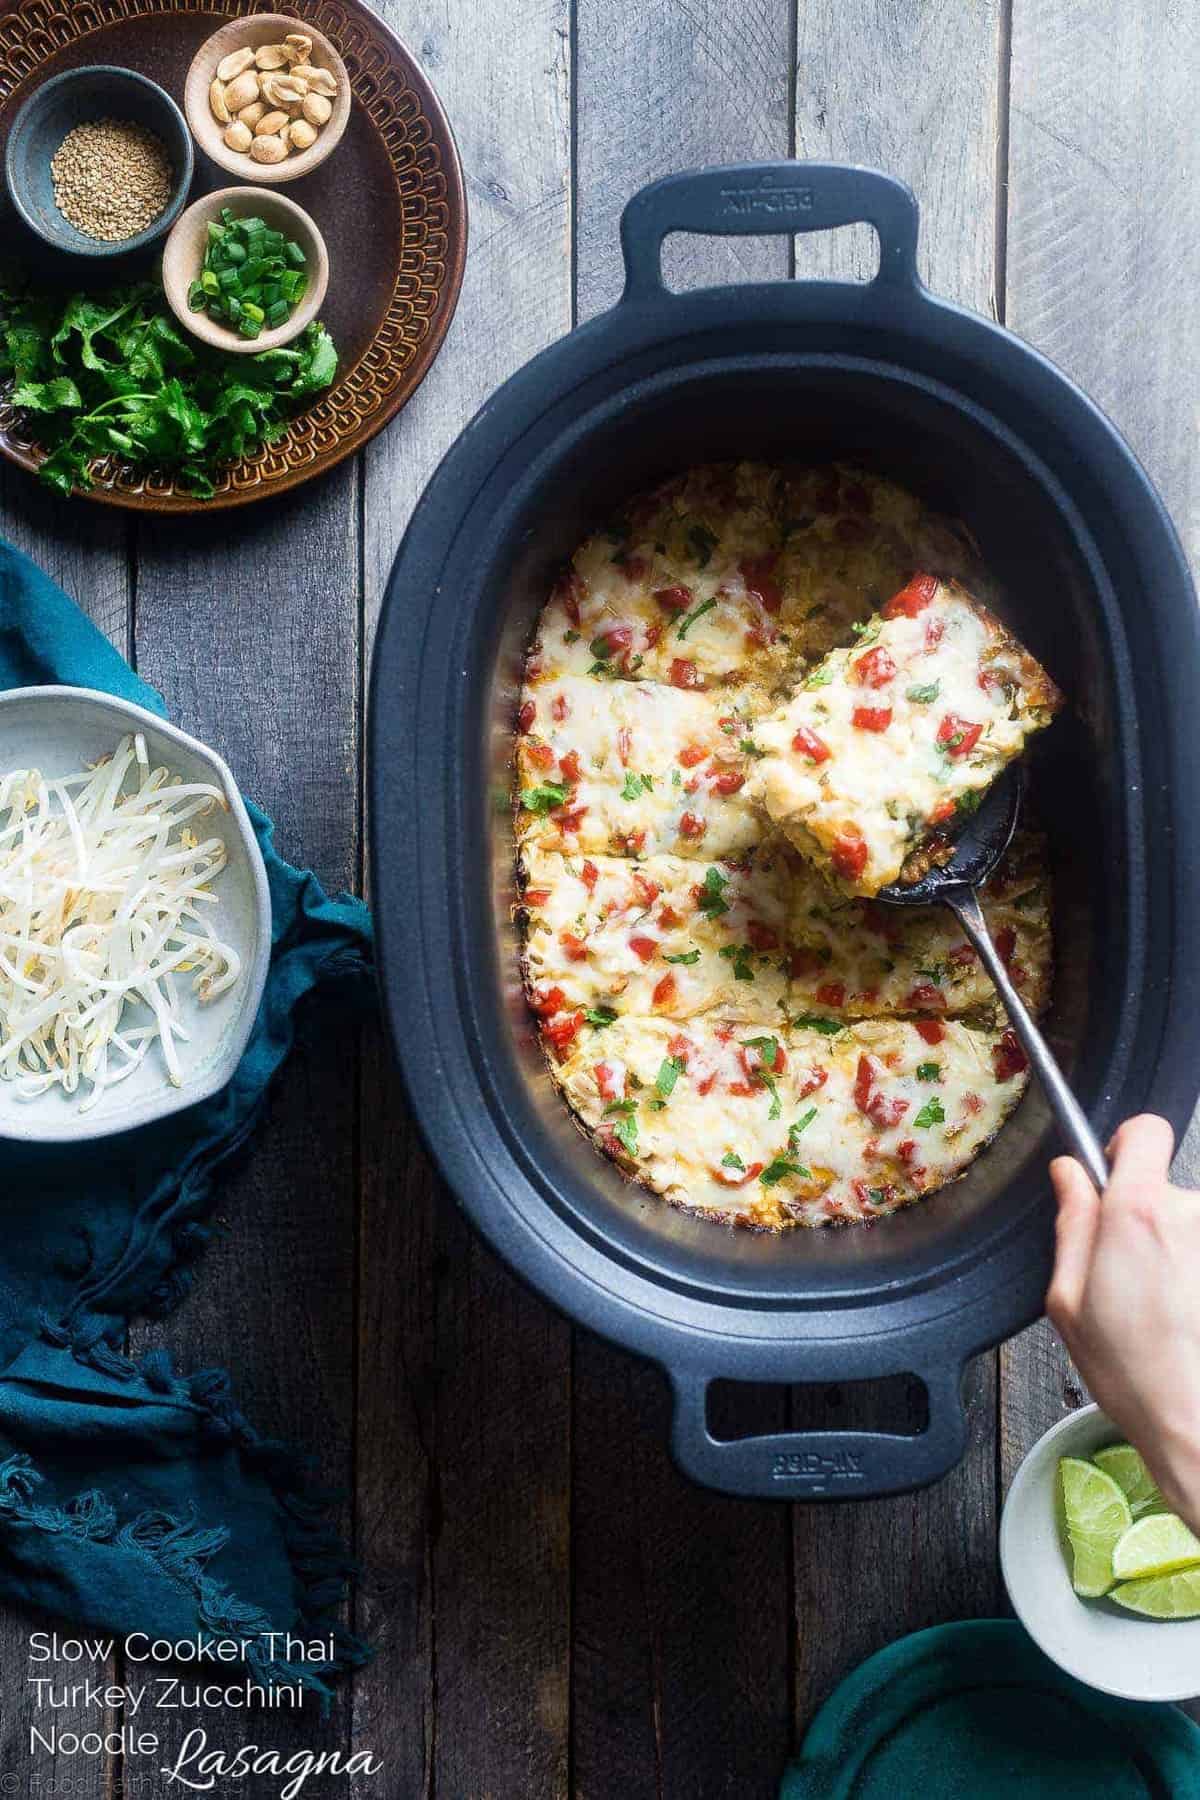 30 Gluten Free, Healthy Crock Pot Dinner Recipes -  All 30 of these Gluten Free Crock Pot Recipes make delicious, EASY, weeknight dinners that the WHOLE family will love! The crock pot does the work for you! | #Foodfaithfitness | #Glutenfree #Healthy #Slowcooker #Crockpot #Dinner